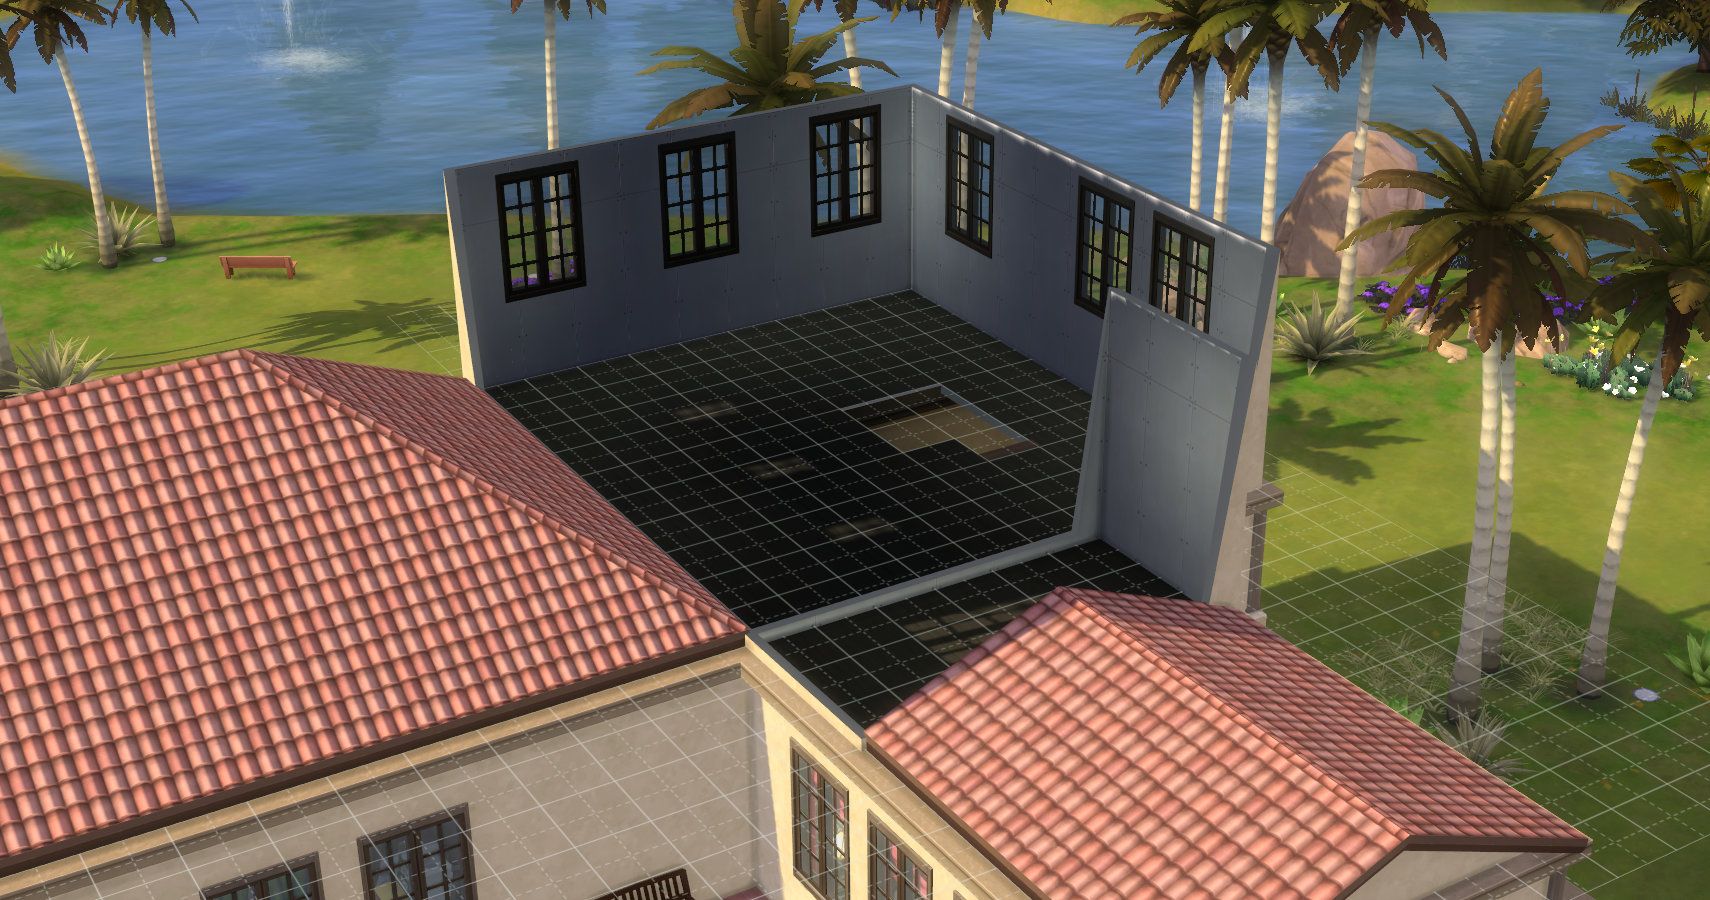 Sims 4 new level addition empty